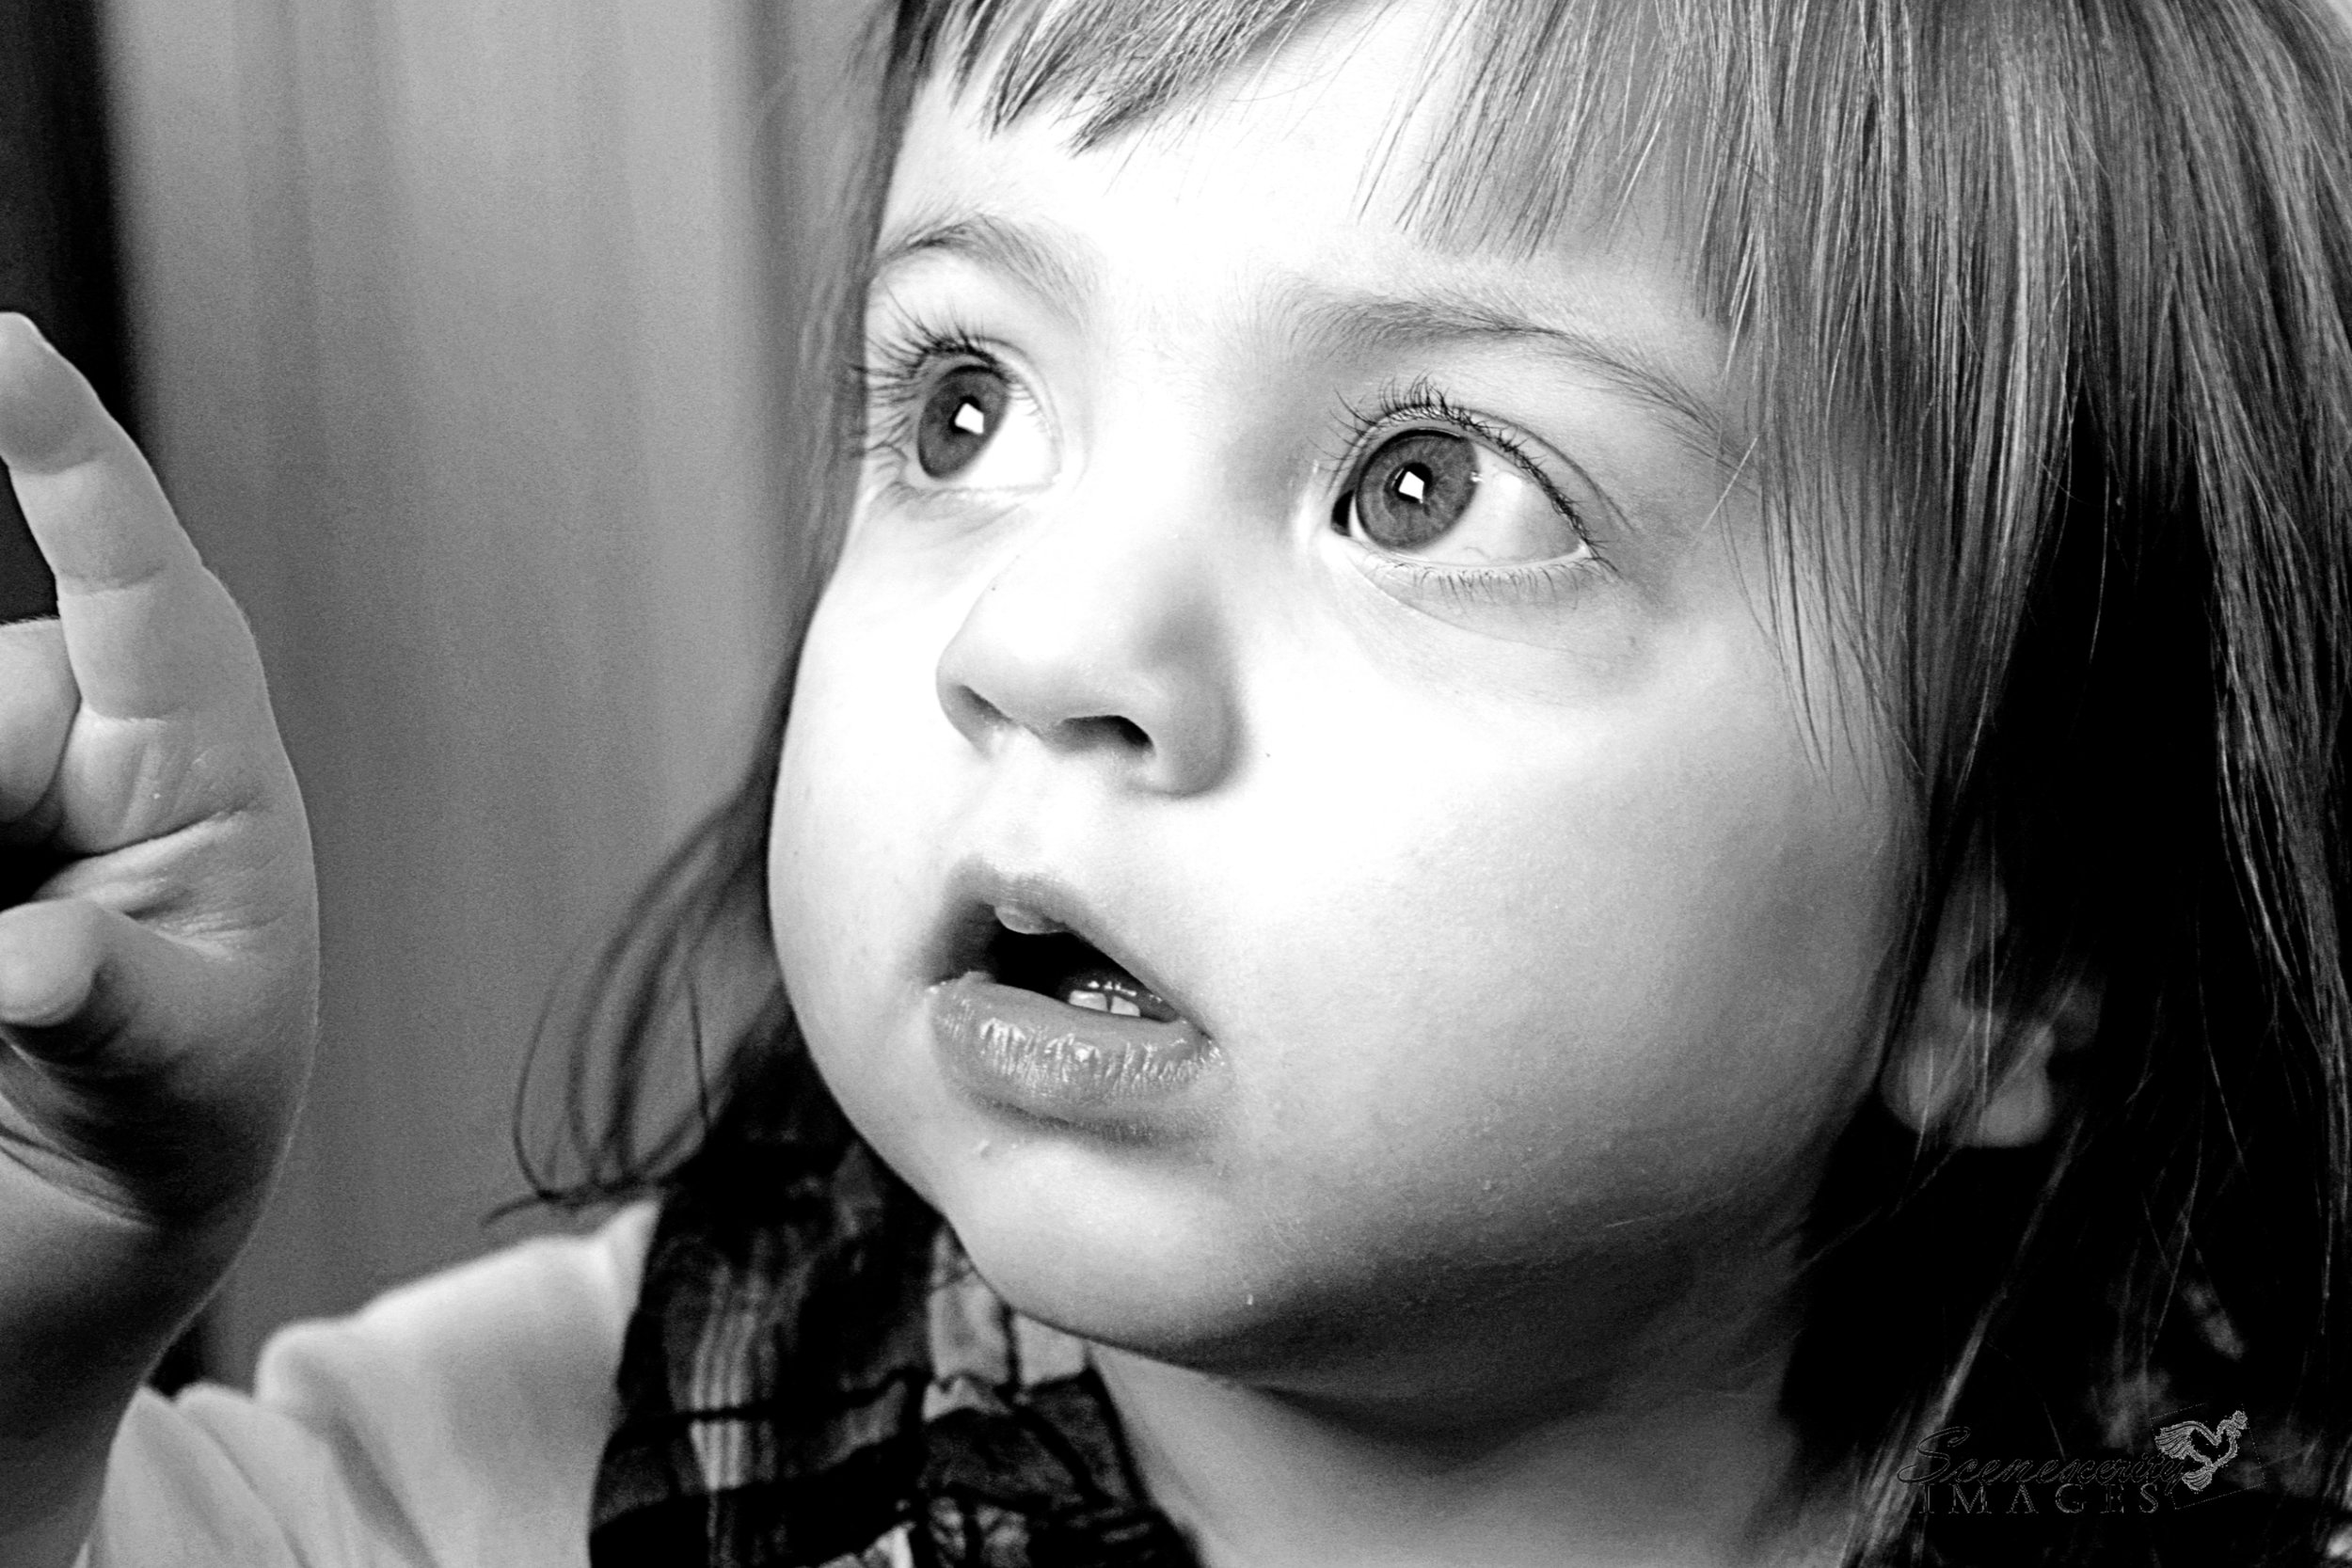  Young Girl Toddler Child Family Portrait Photography NYC Connecticut Black and White 